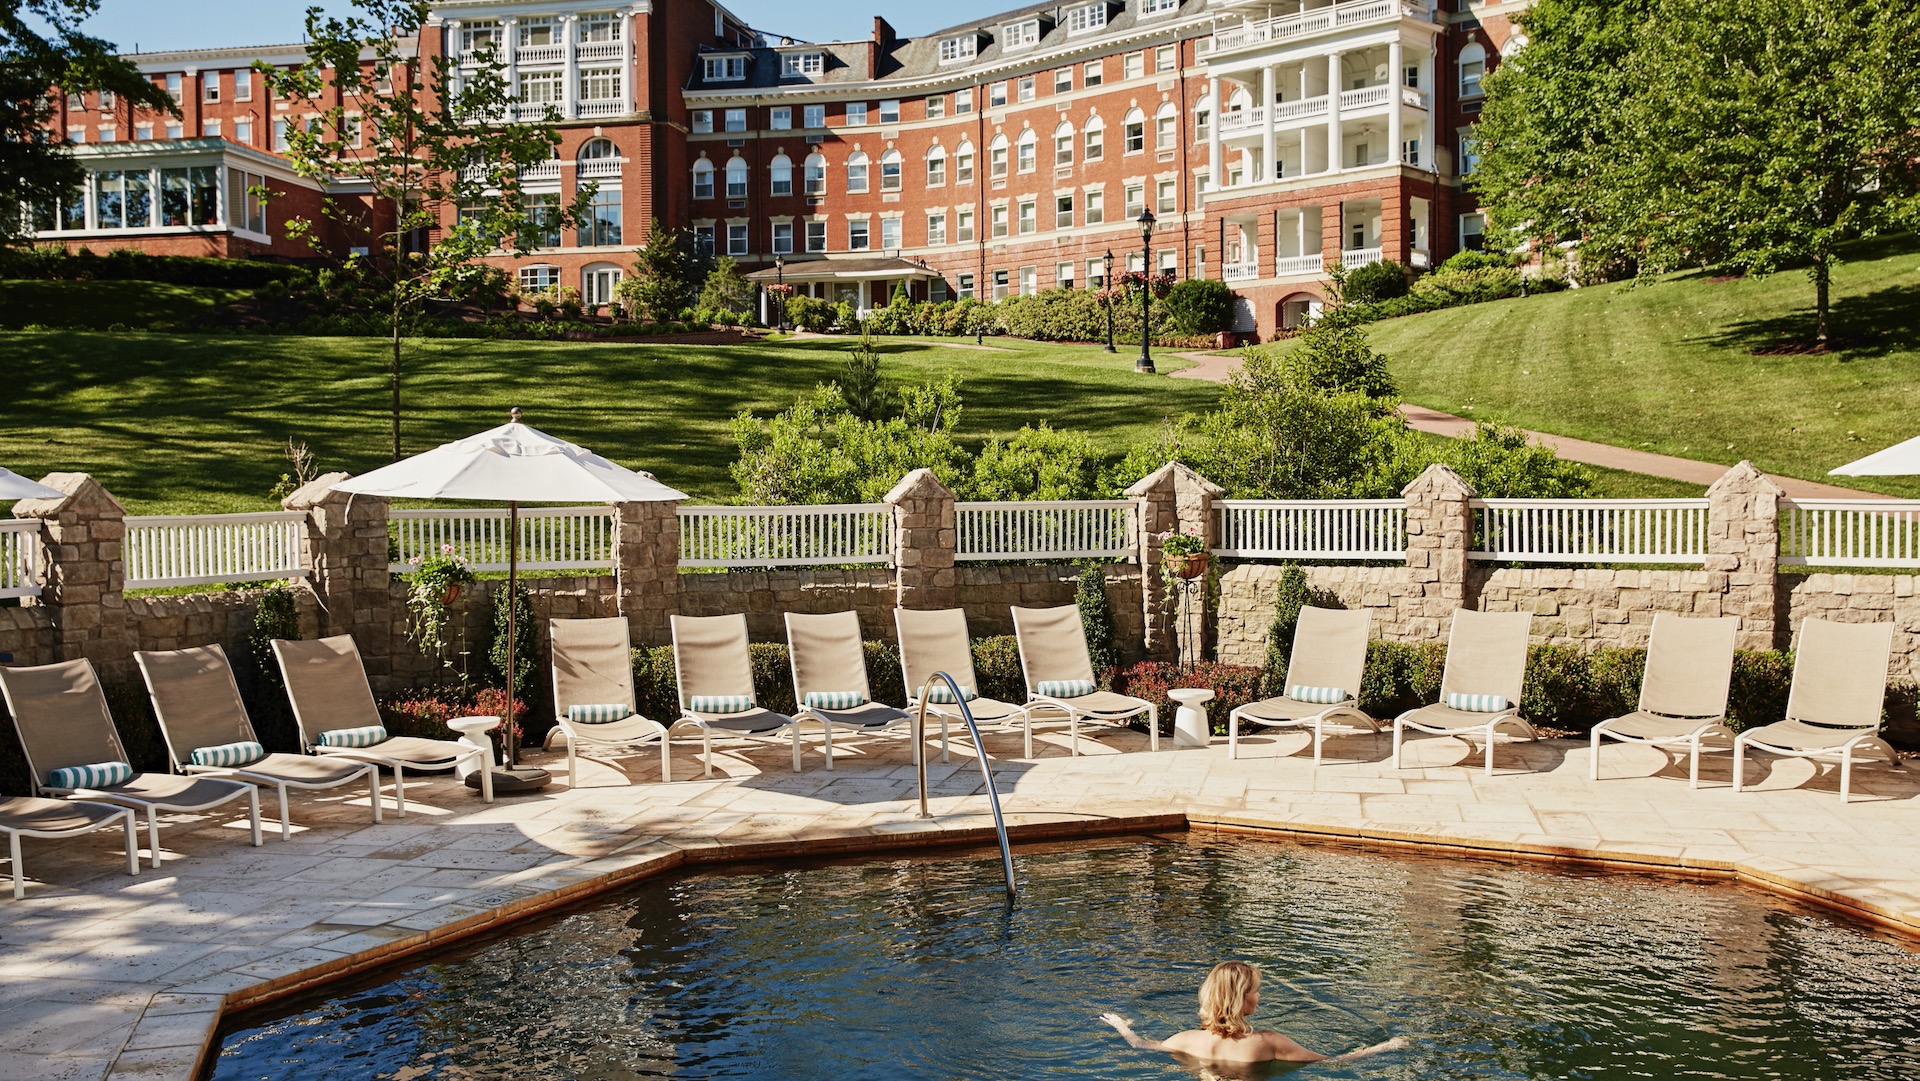 The Spa at The Omni Homestead Resort, Spas of America